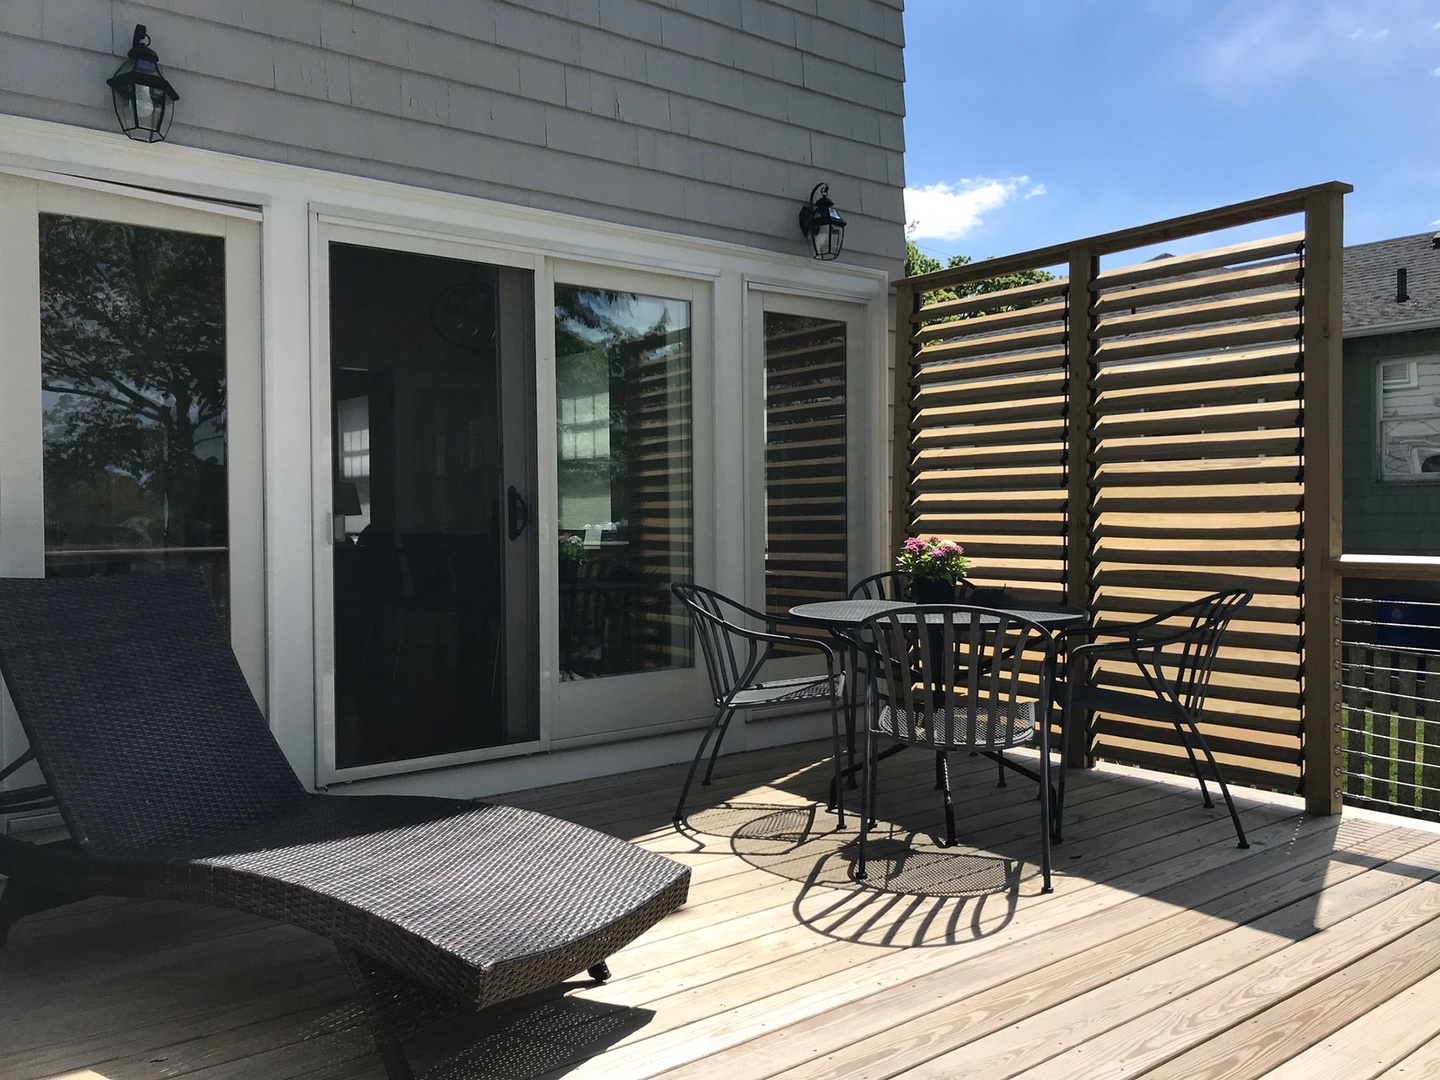 The back deck is perfect for outdoor dining.